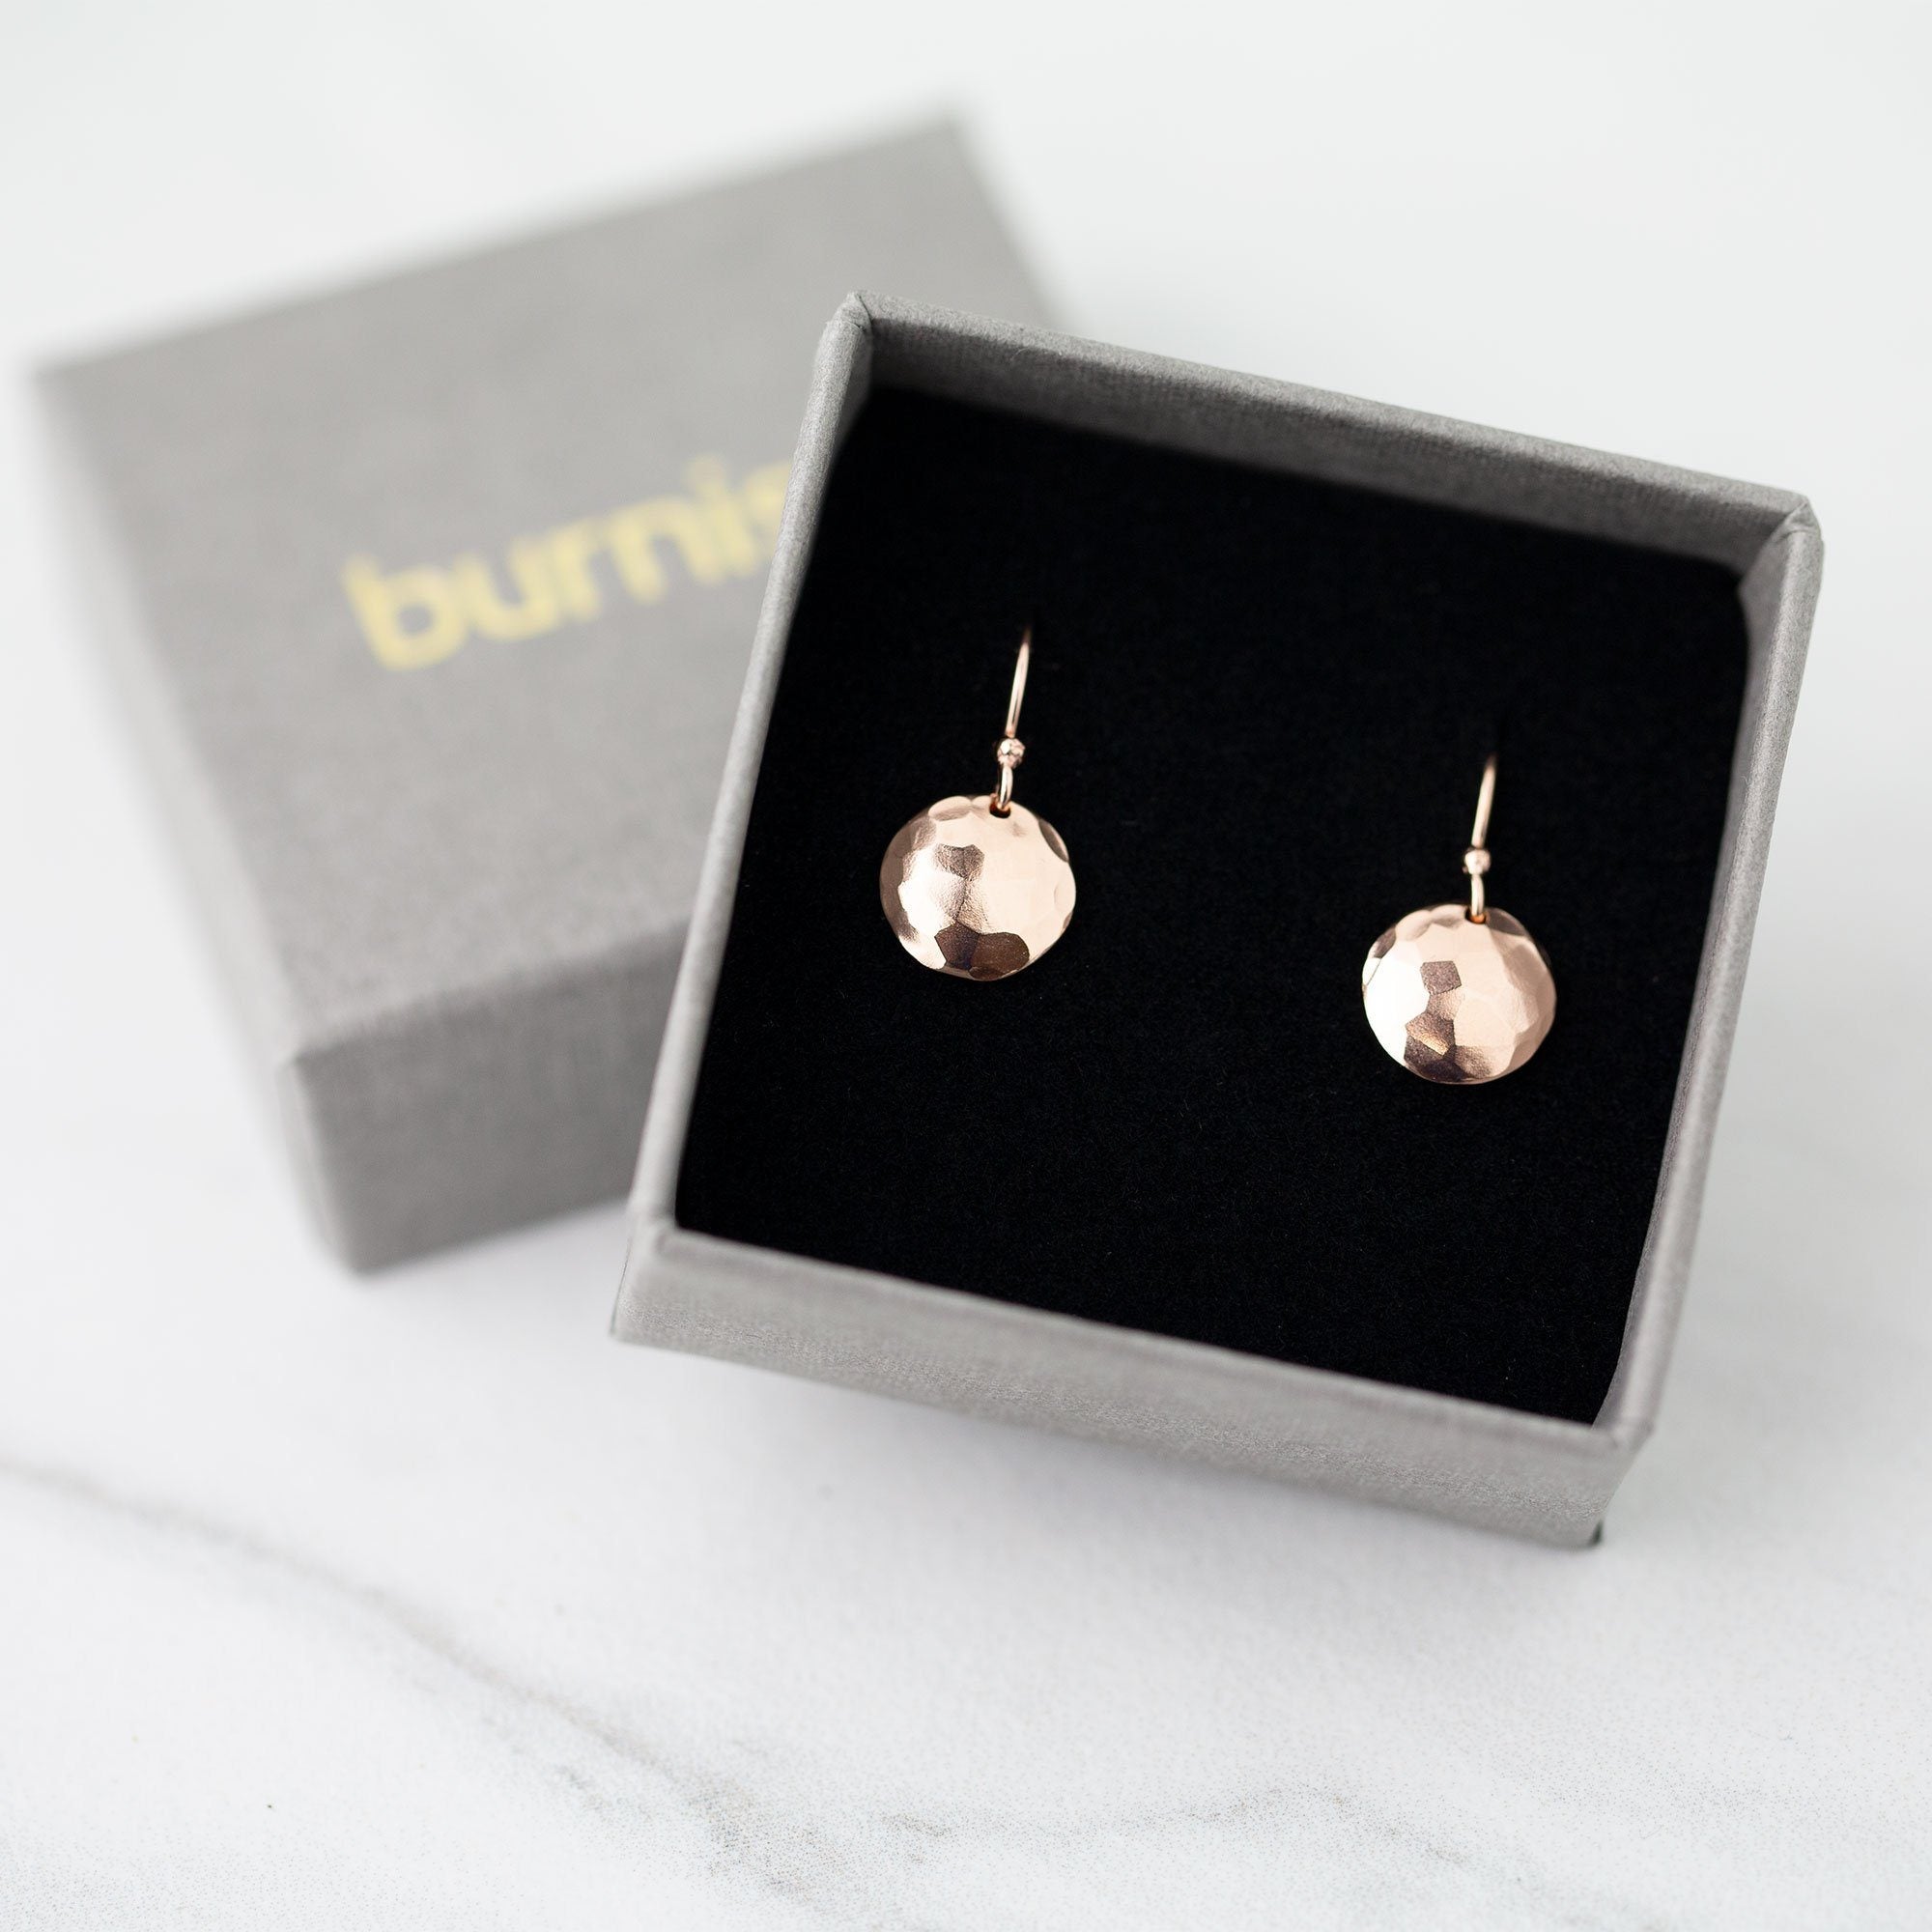 Hammered & Domed Earrings - Rose Gold Fill - Handmade Jewelry by Burnish